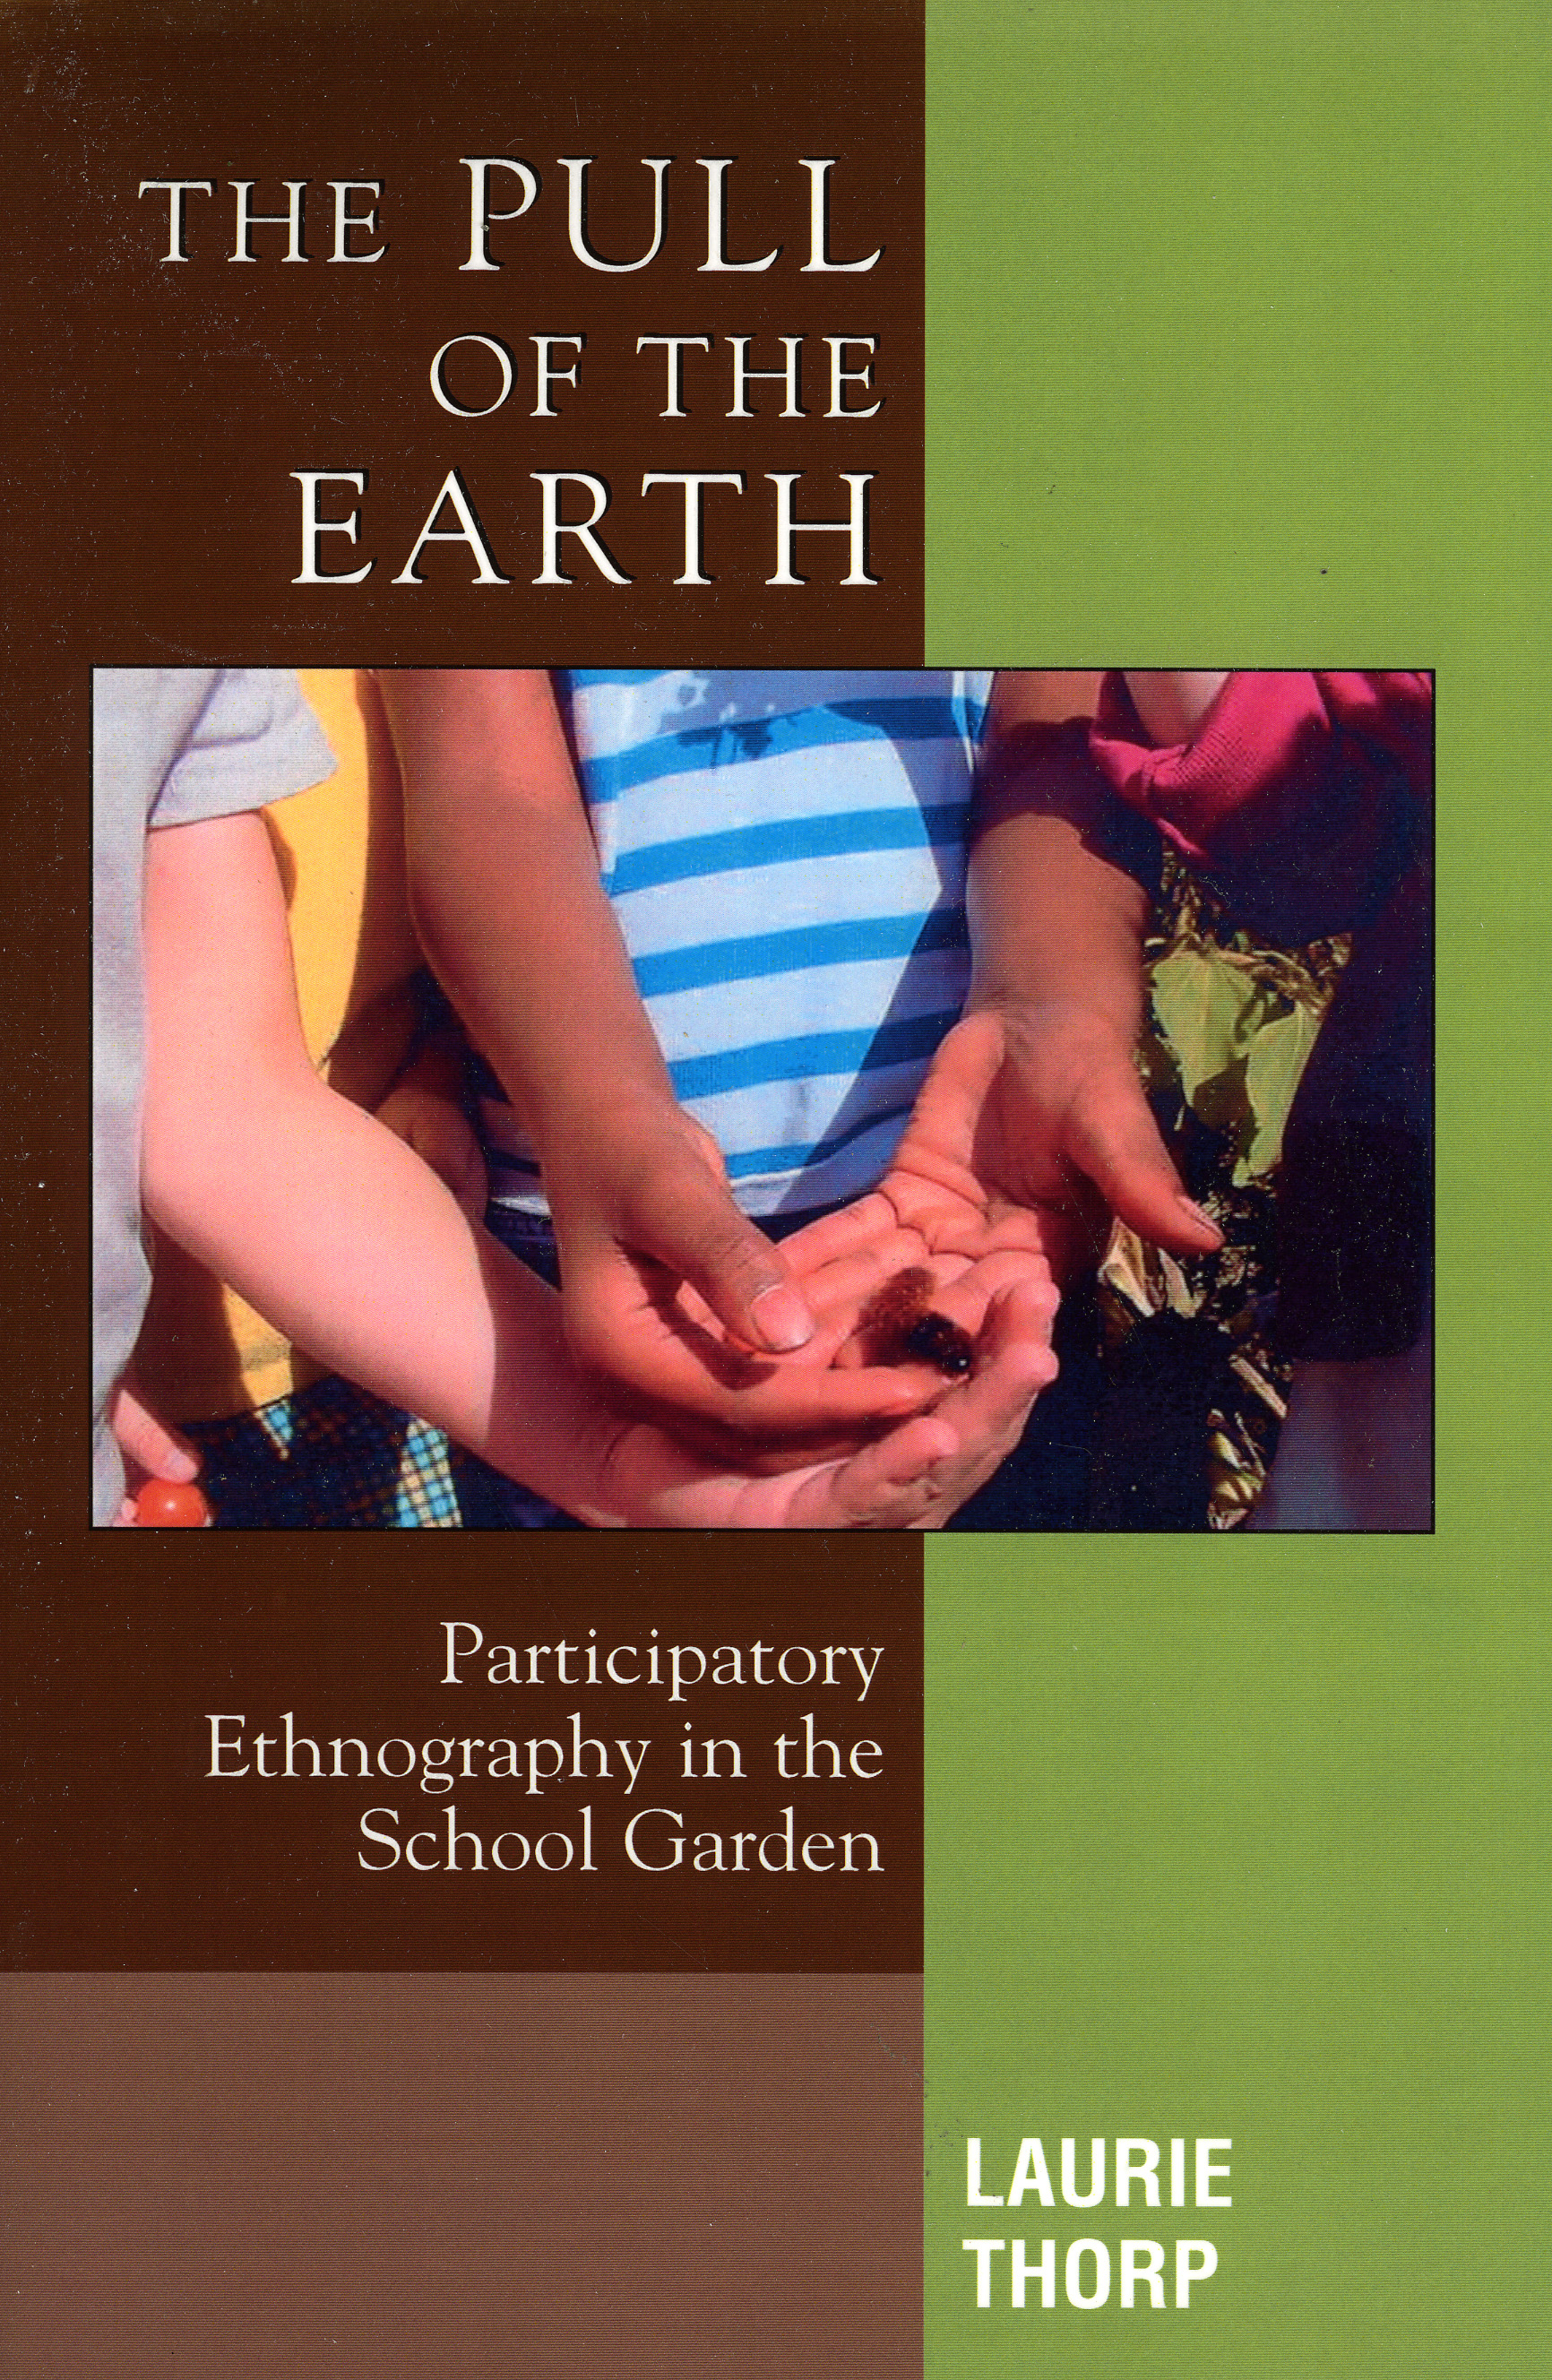 The Pull of the Earth: Participatory Ethnography in the School Garden